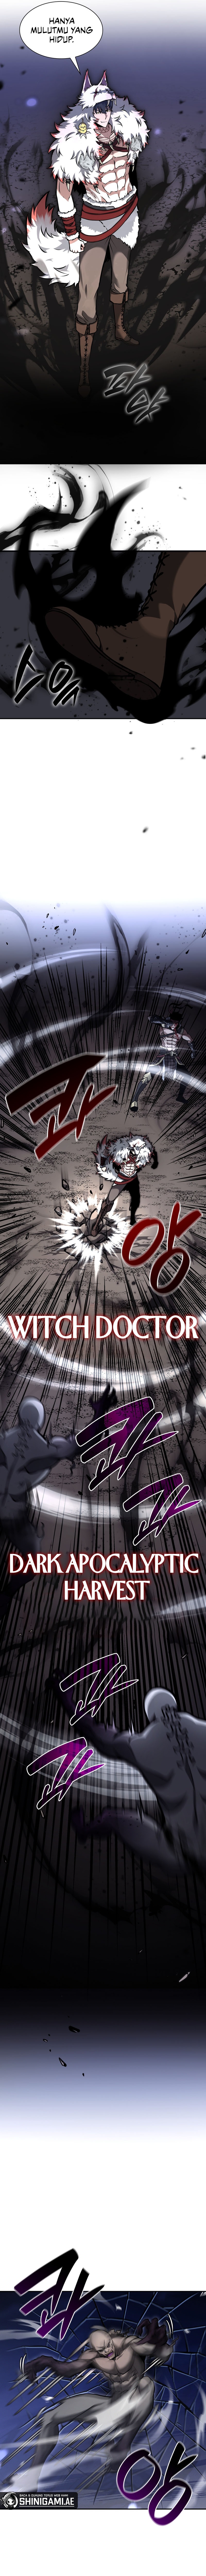 id-i-returned-as-an-fff-class-witch-doctor Chapter 63